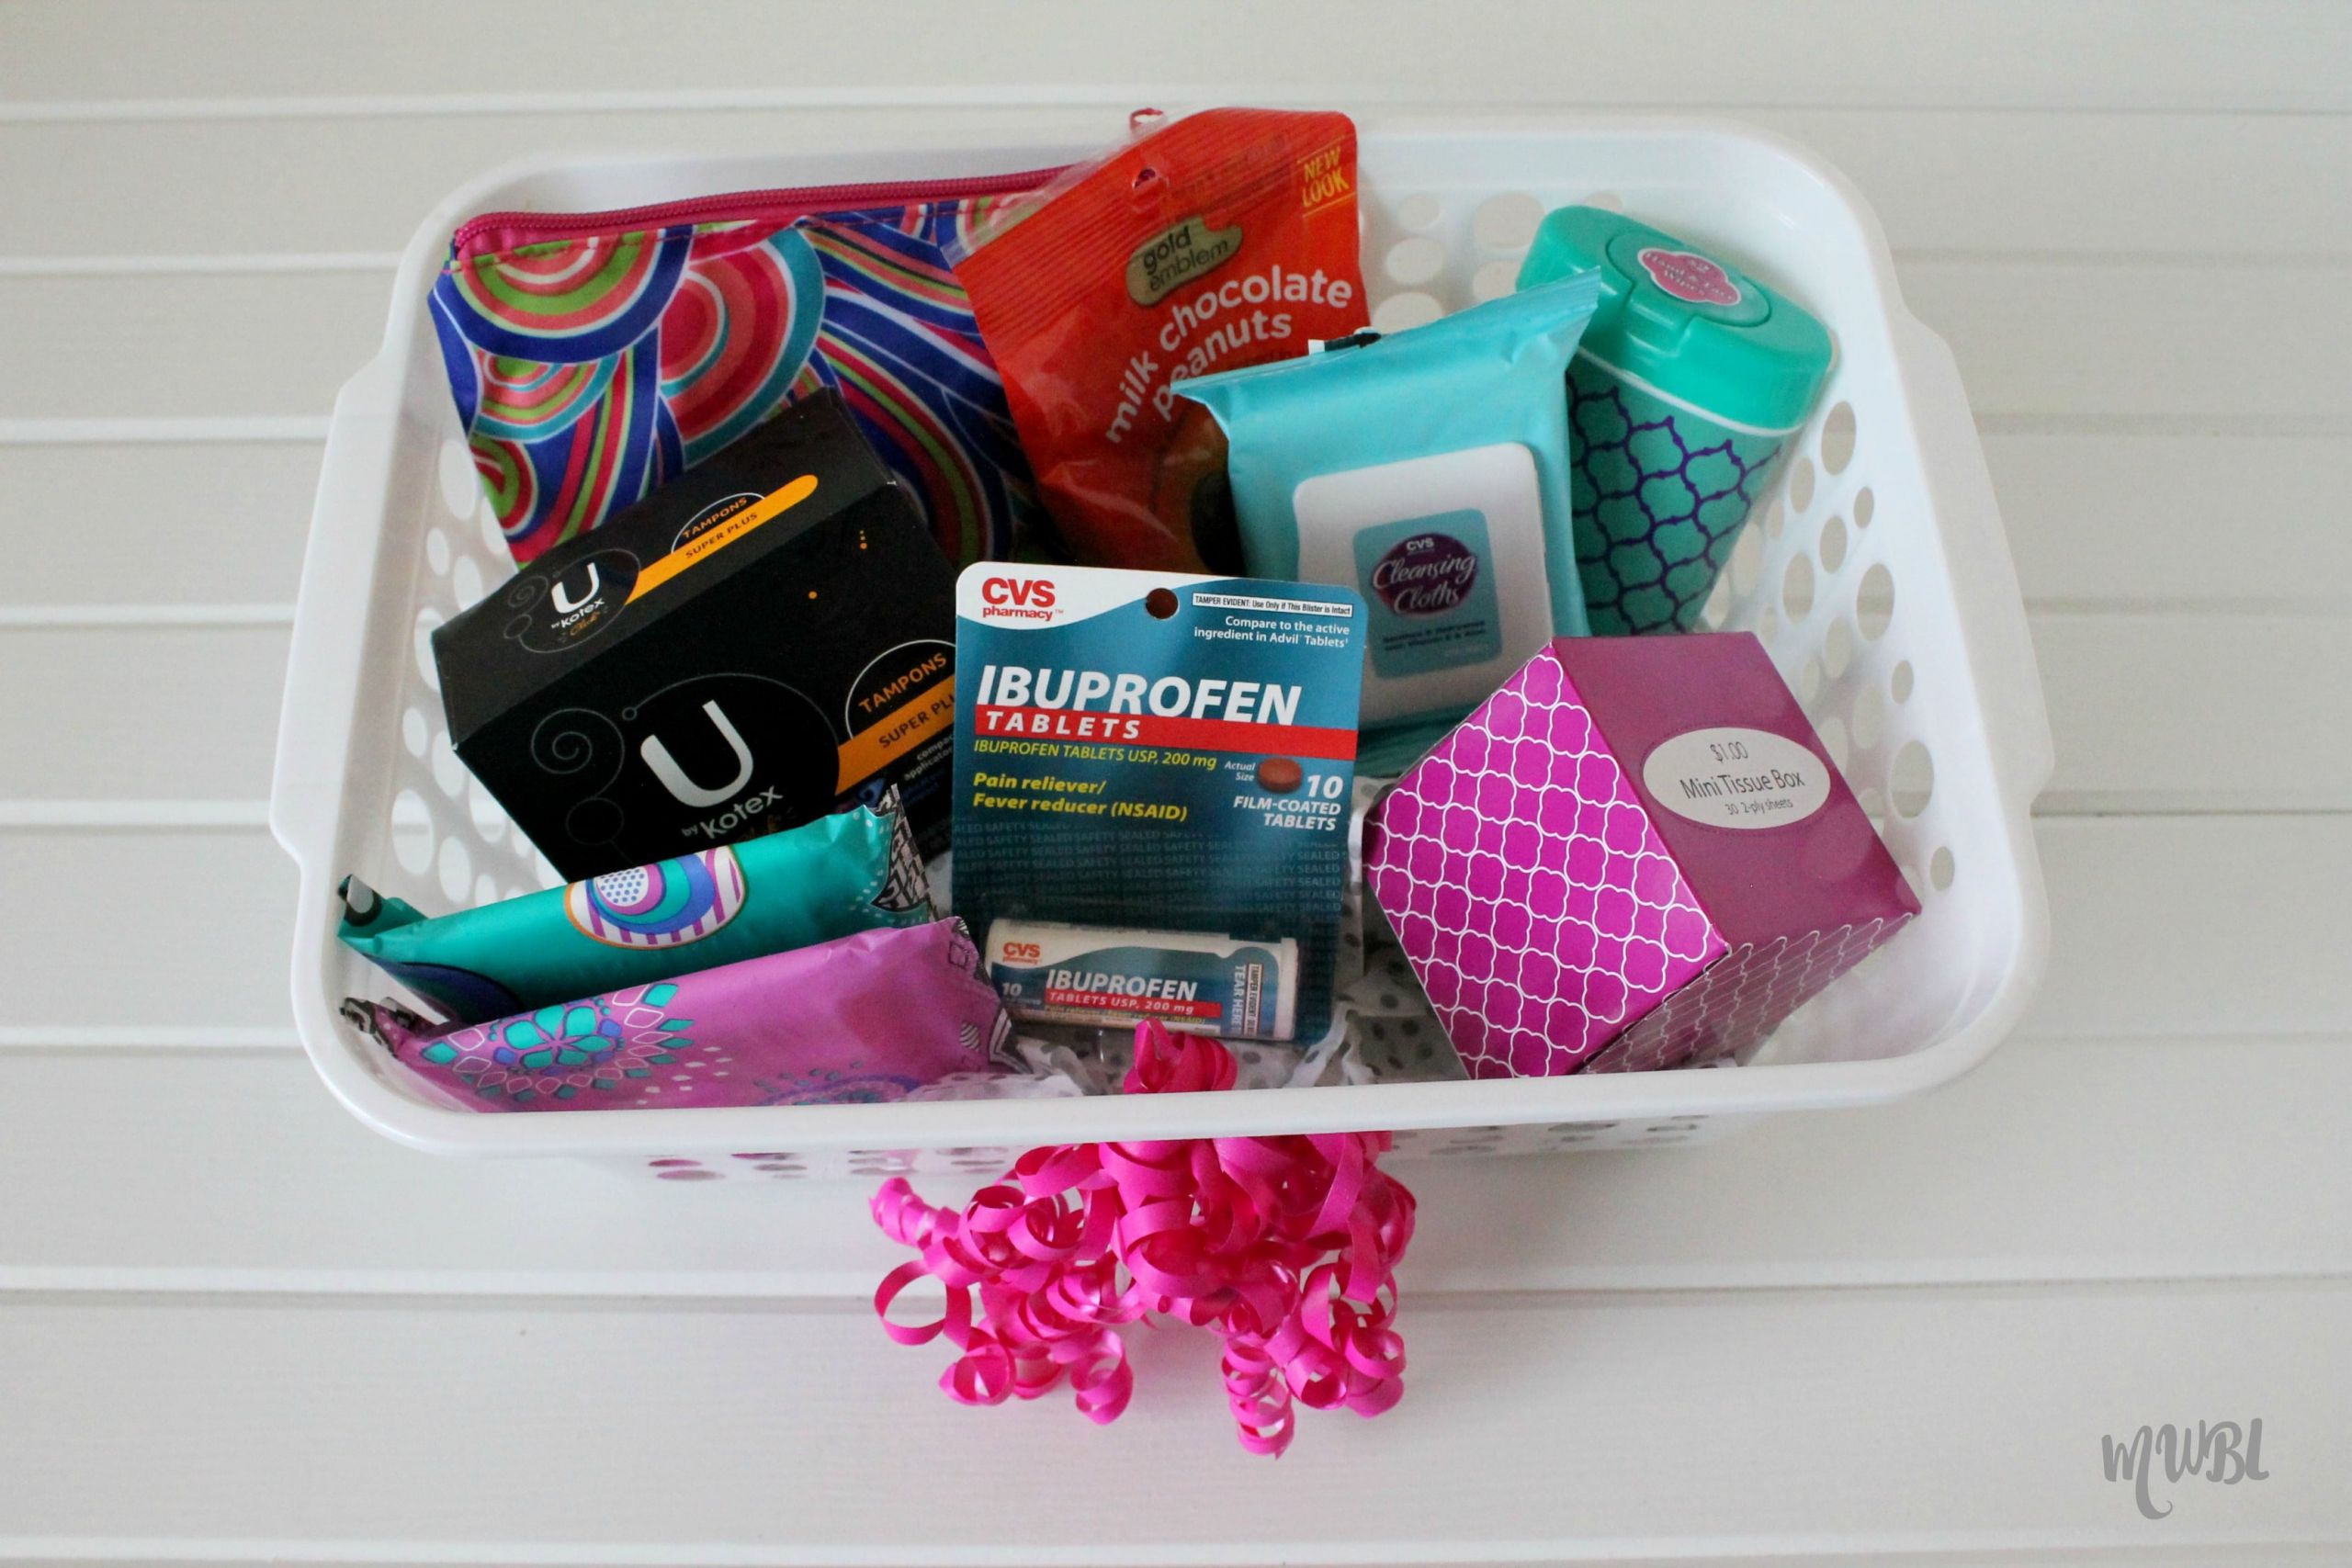 Pampering Gift Basket Ideas
 6 Ways to Feel Better During Your Period Pampering Gift